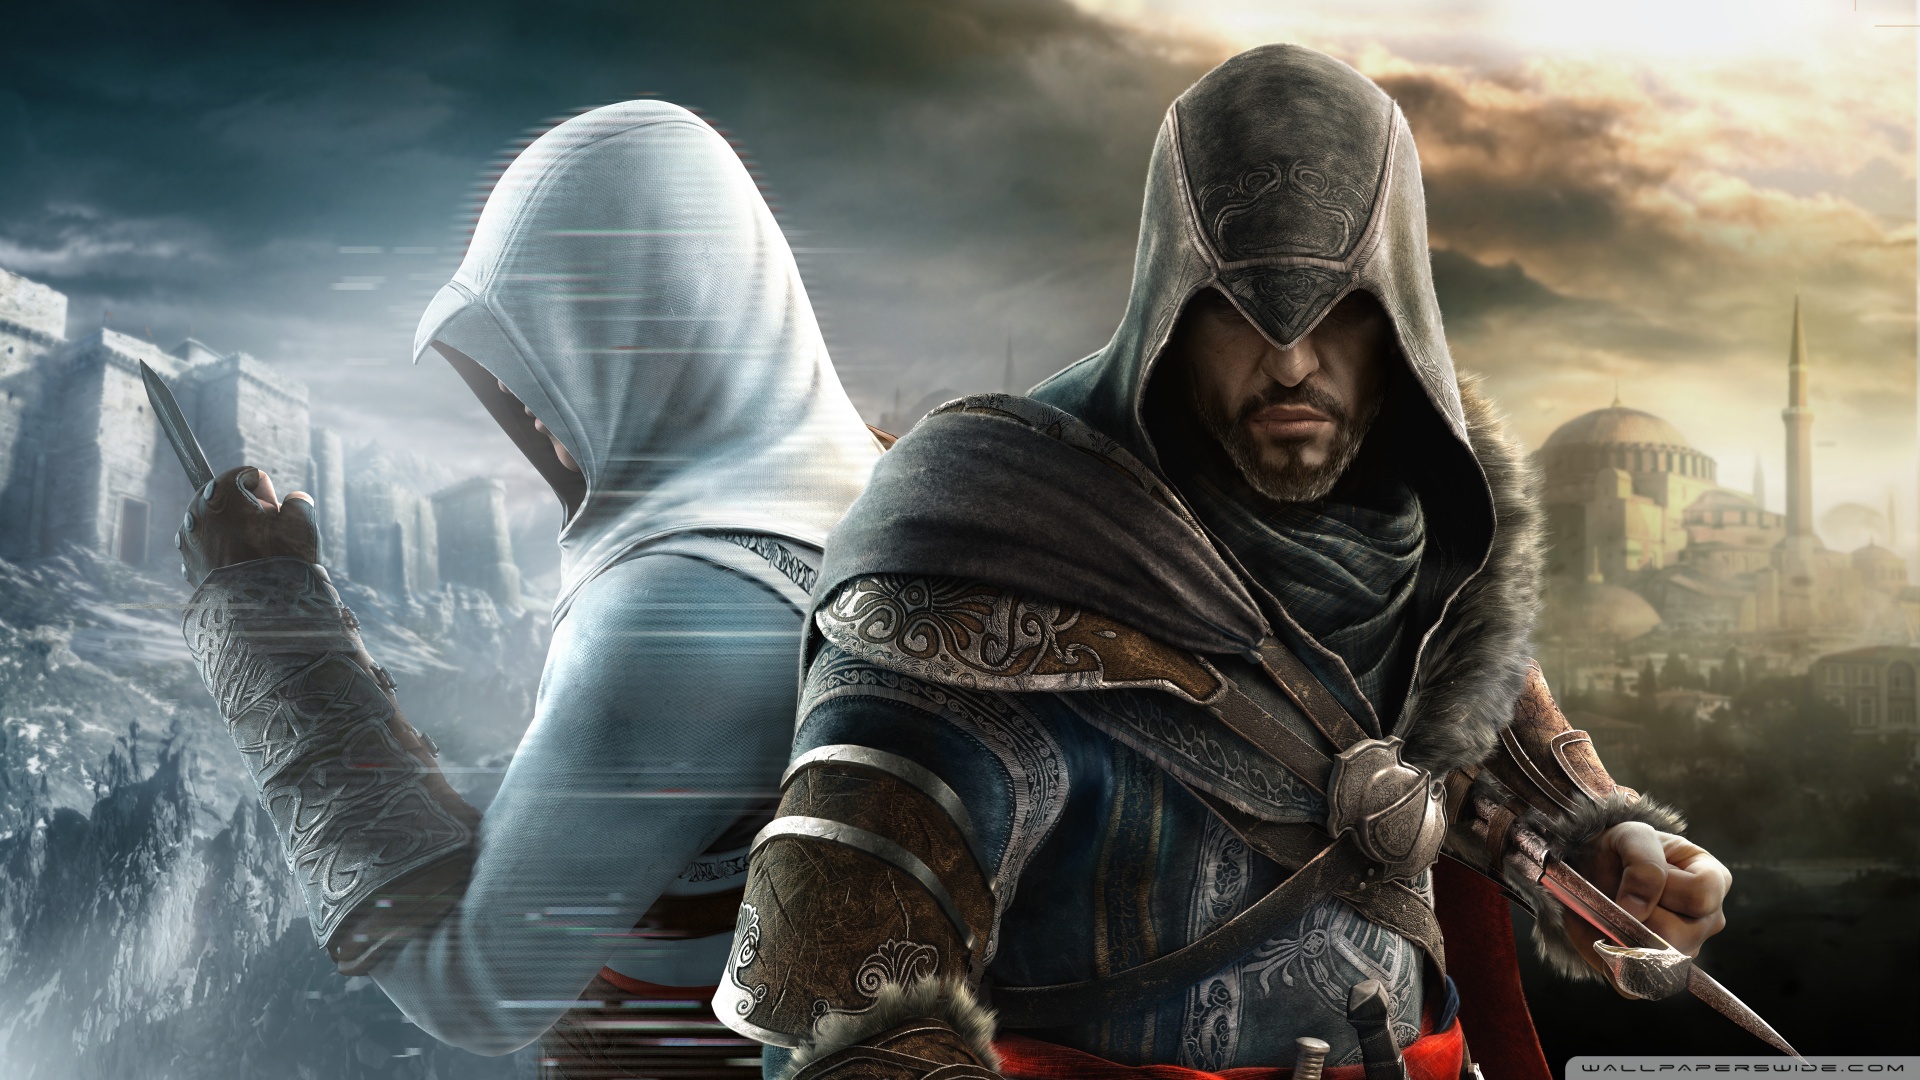 Assassin's Creed: Revelations Pics, Video Game Collection